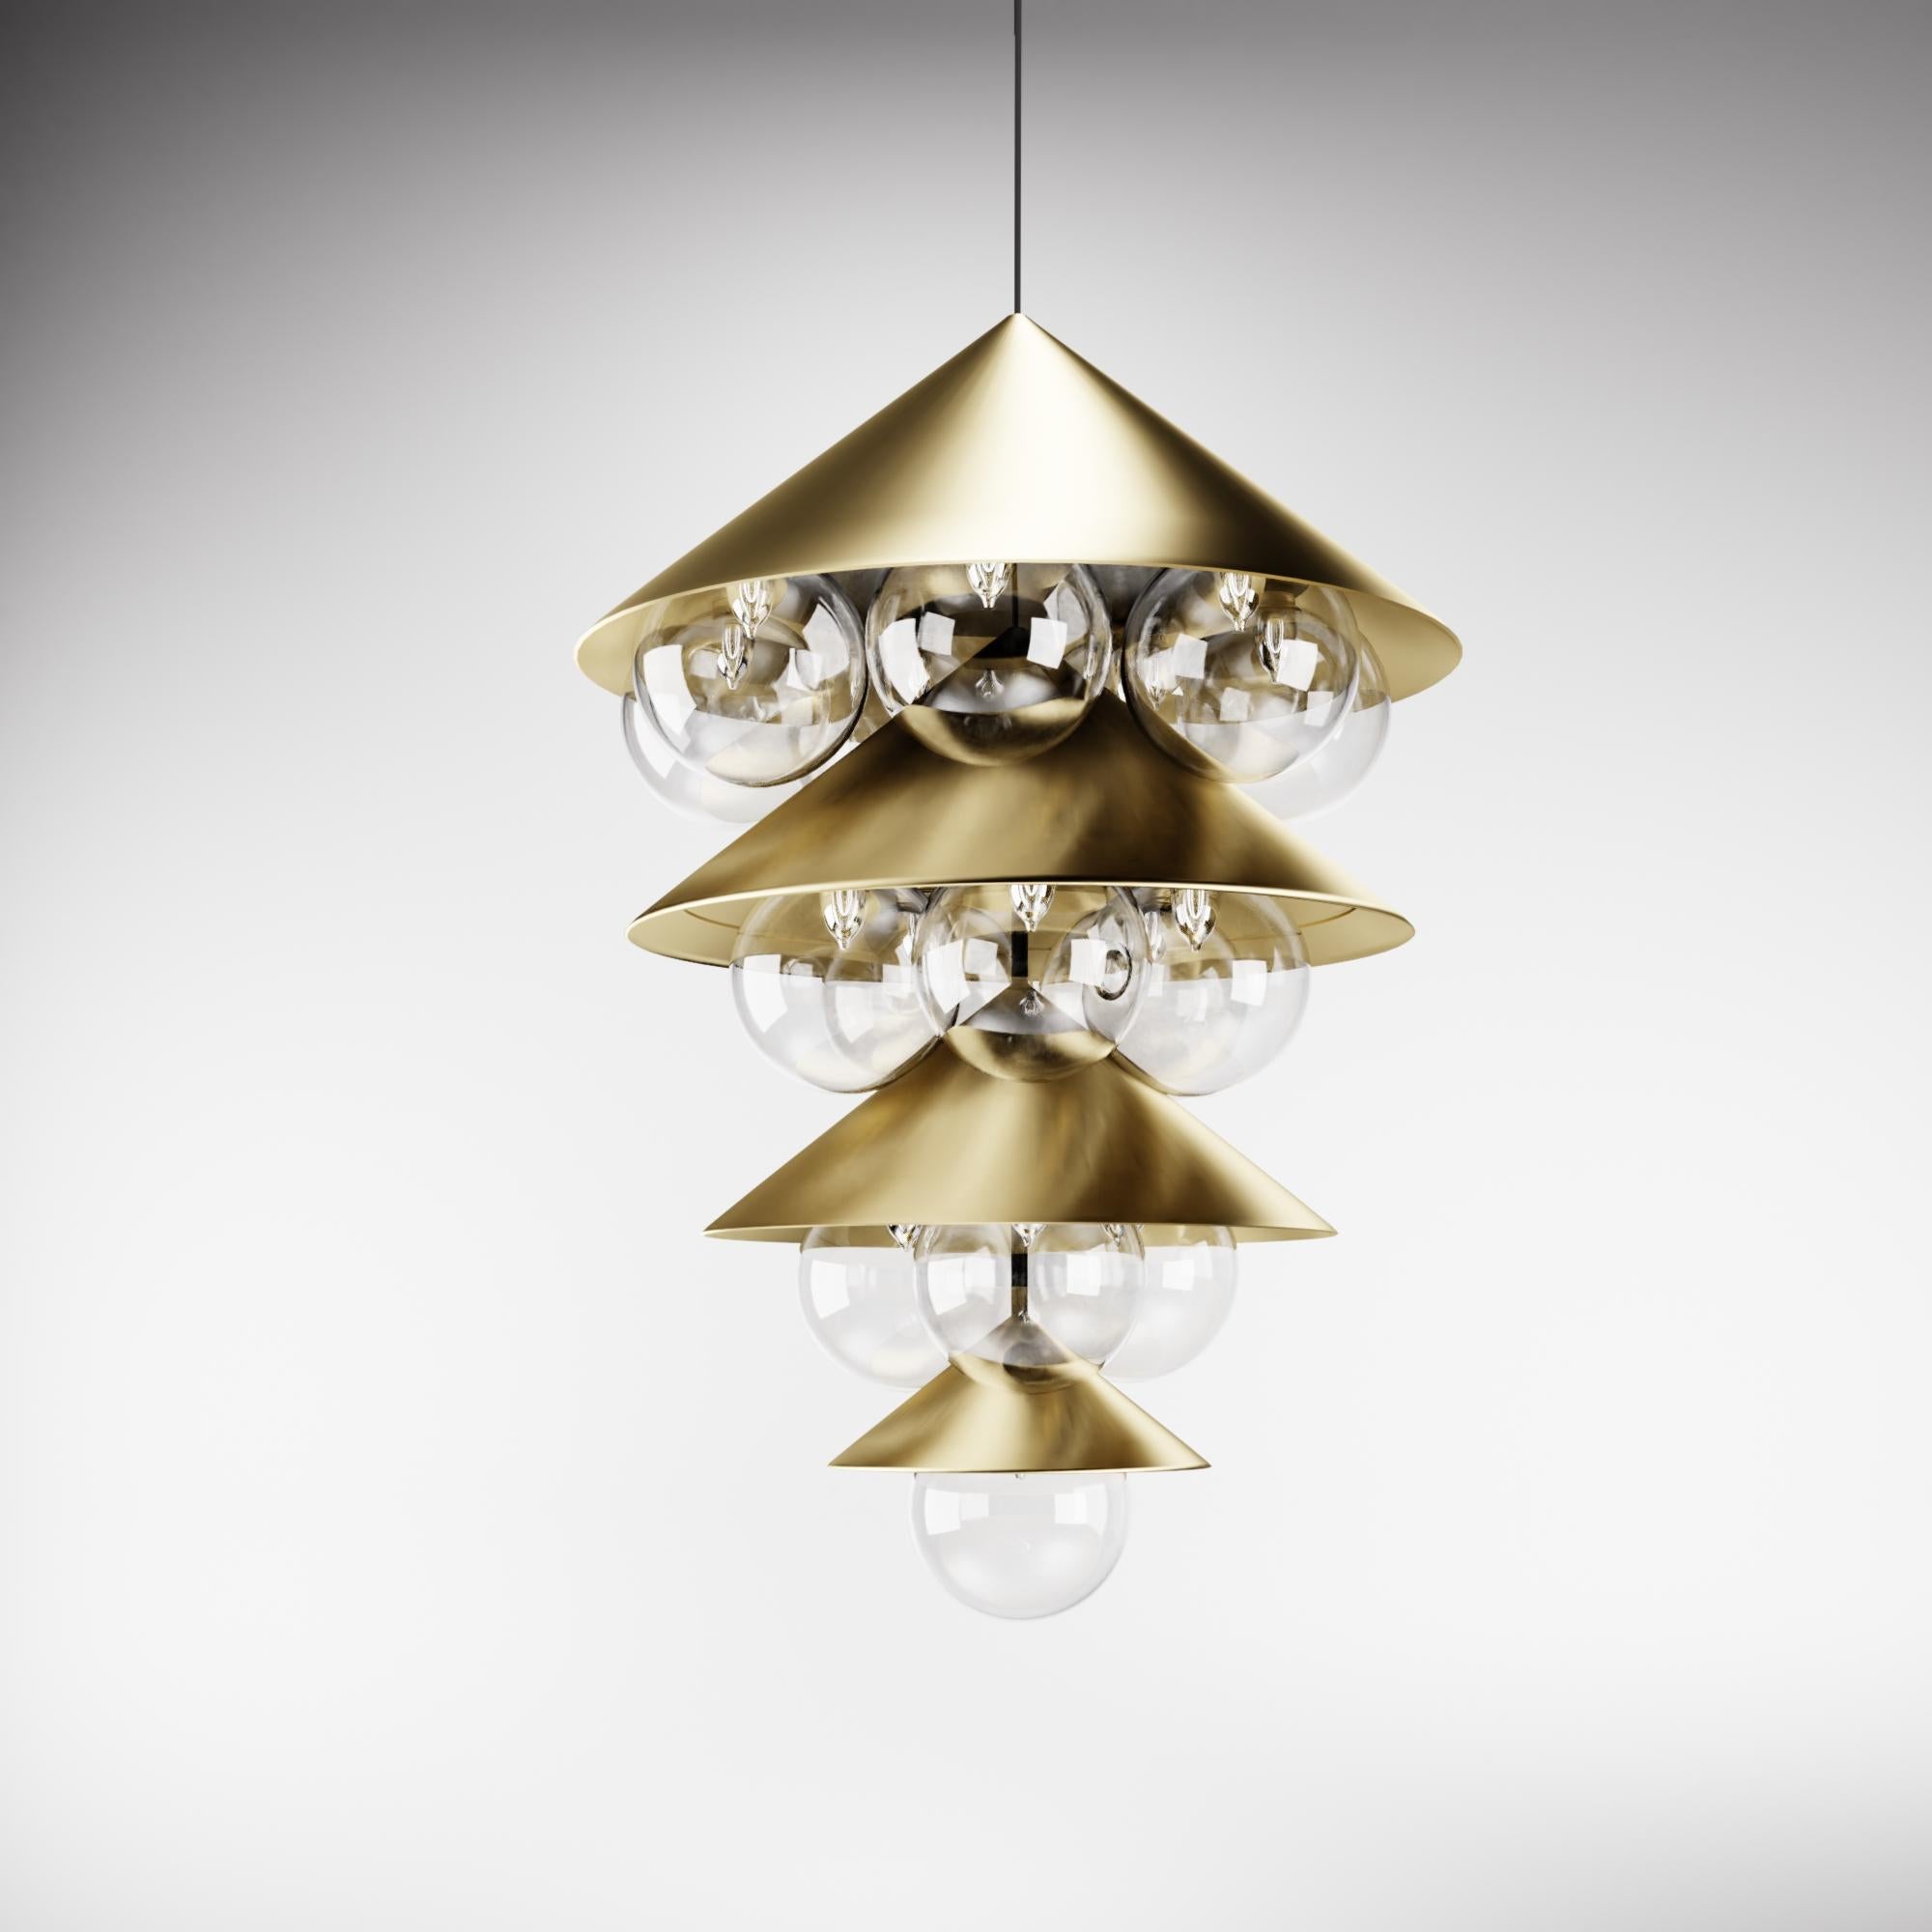 Brass Nonla pendant lamp I by Kasadamo
Dimensions: D 50 x H 105 cm
Materials: brass, aluminium, glass
Also Available: Other size, color, and glass colors available.

All our lamps can be wired according to each country. If sold to the USA it